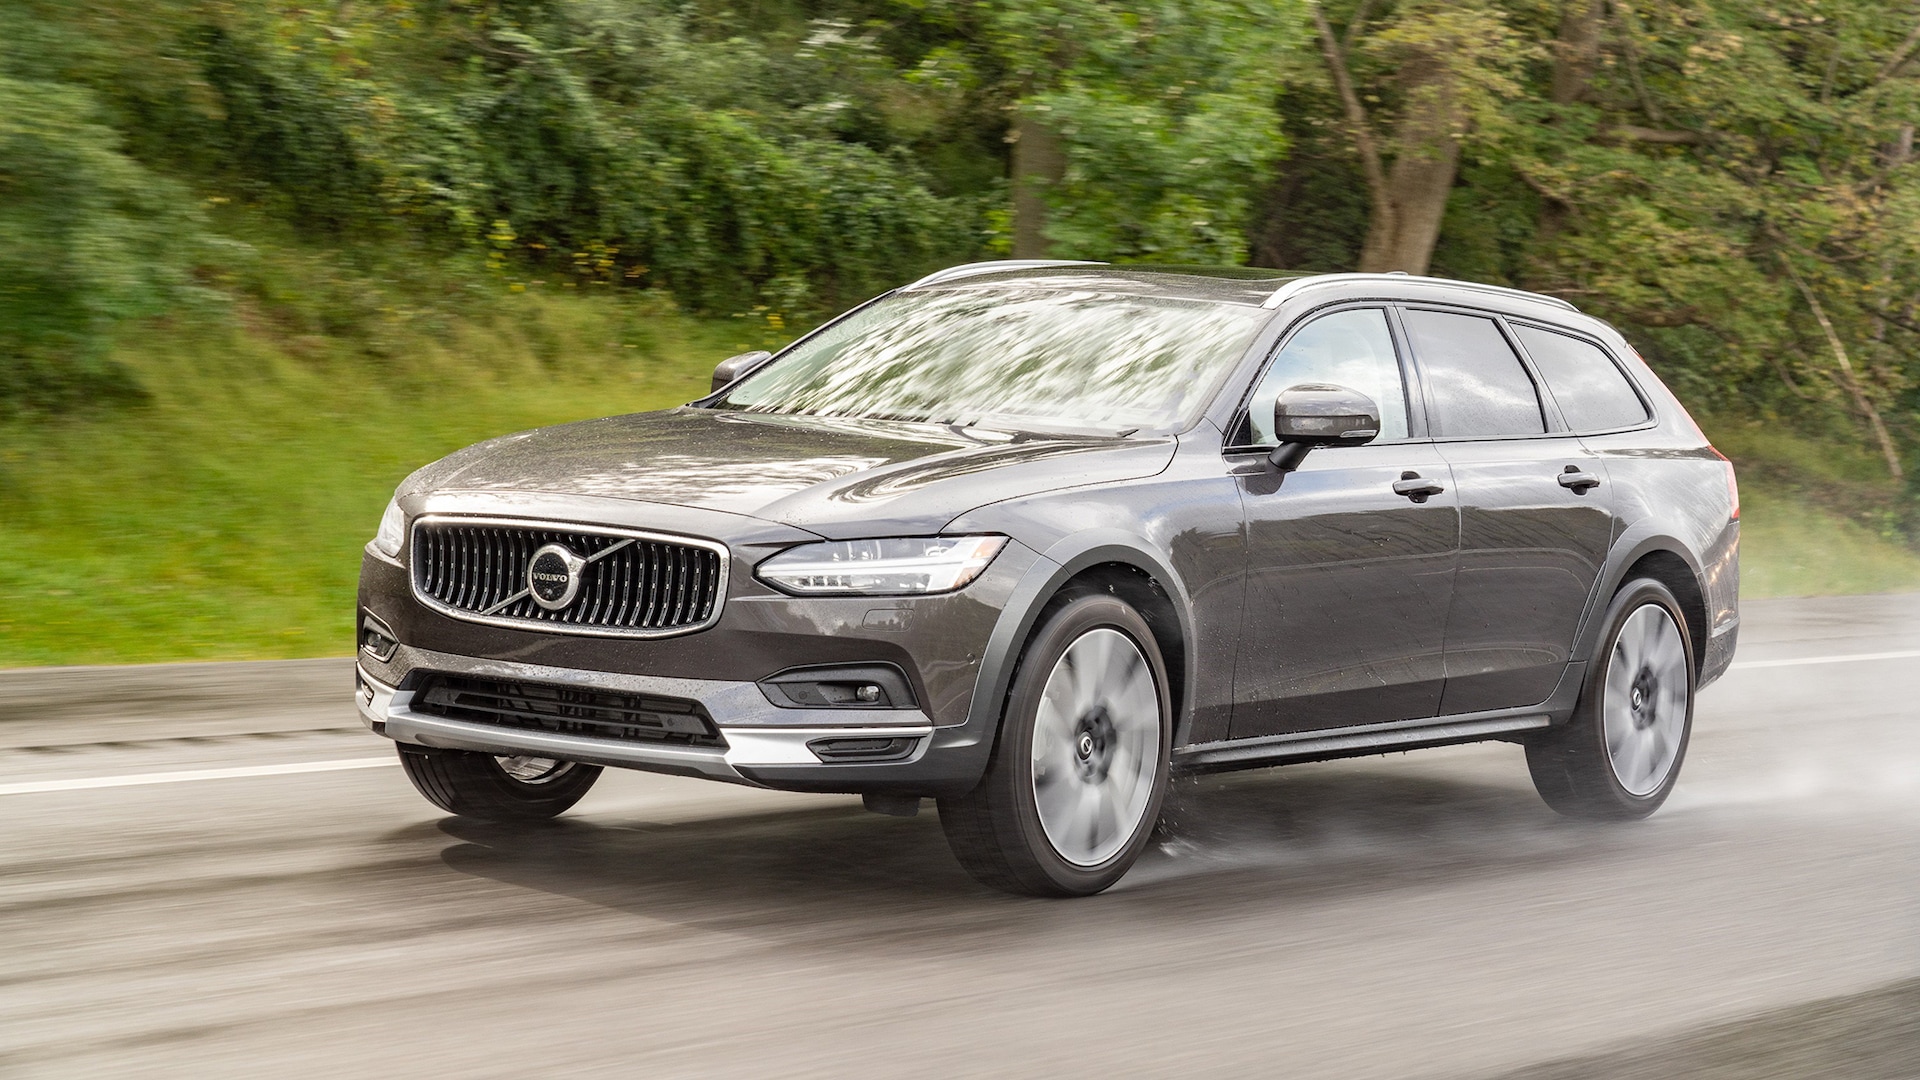 2022 Volvo V90 Prices, Reviews, and Photos - MotorTrend